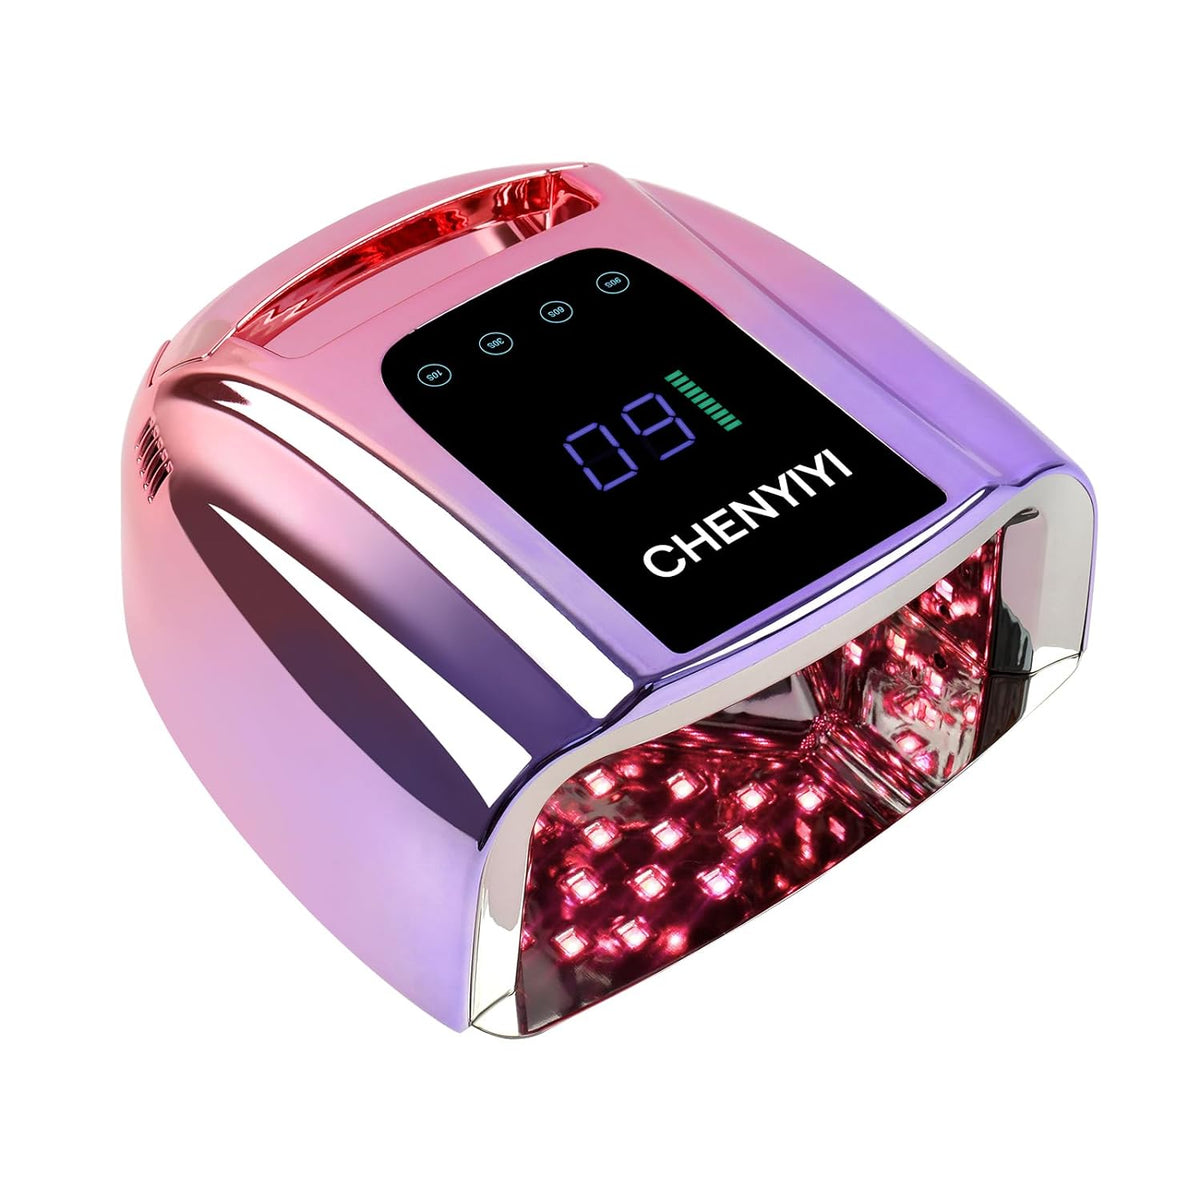 96W Rechargeable UV LED Nail Lamp, Portable Cordless UV Light for Nails with LCD Display Auto Sensor, Professional Nail Dryer for Salon (Purple)